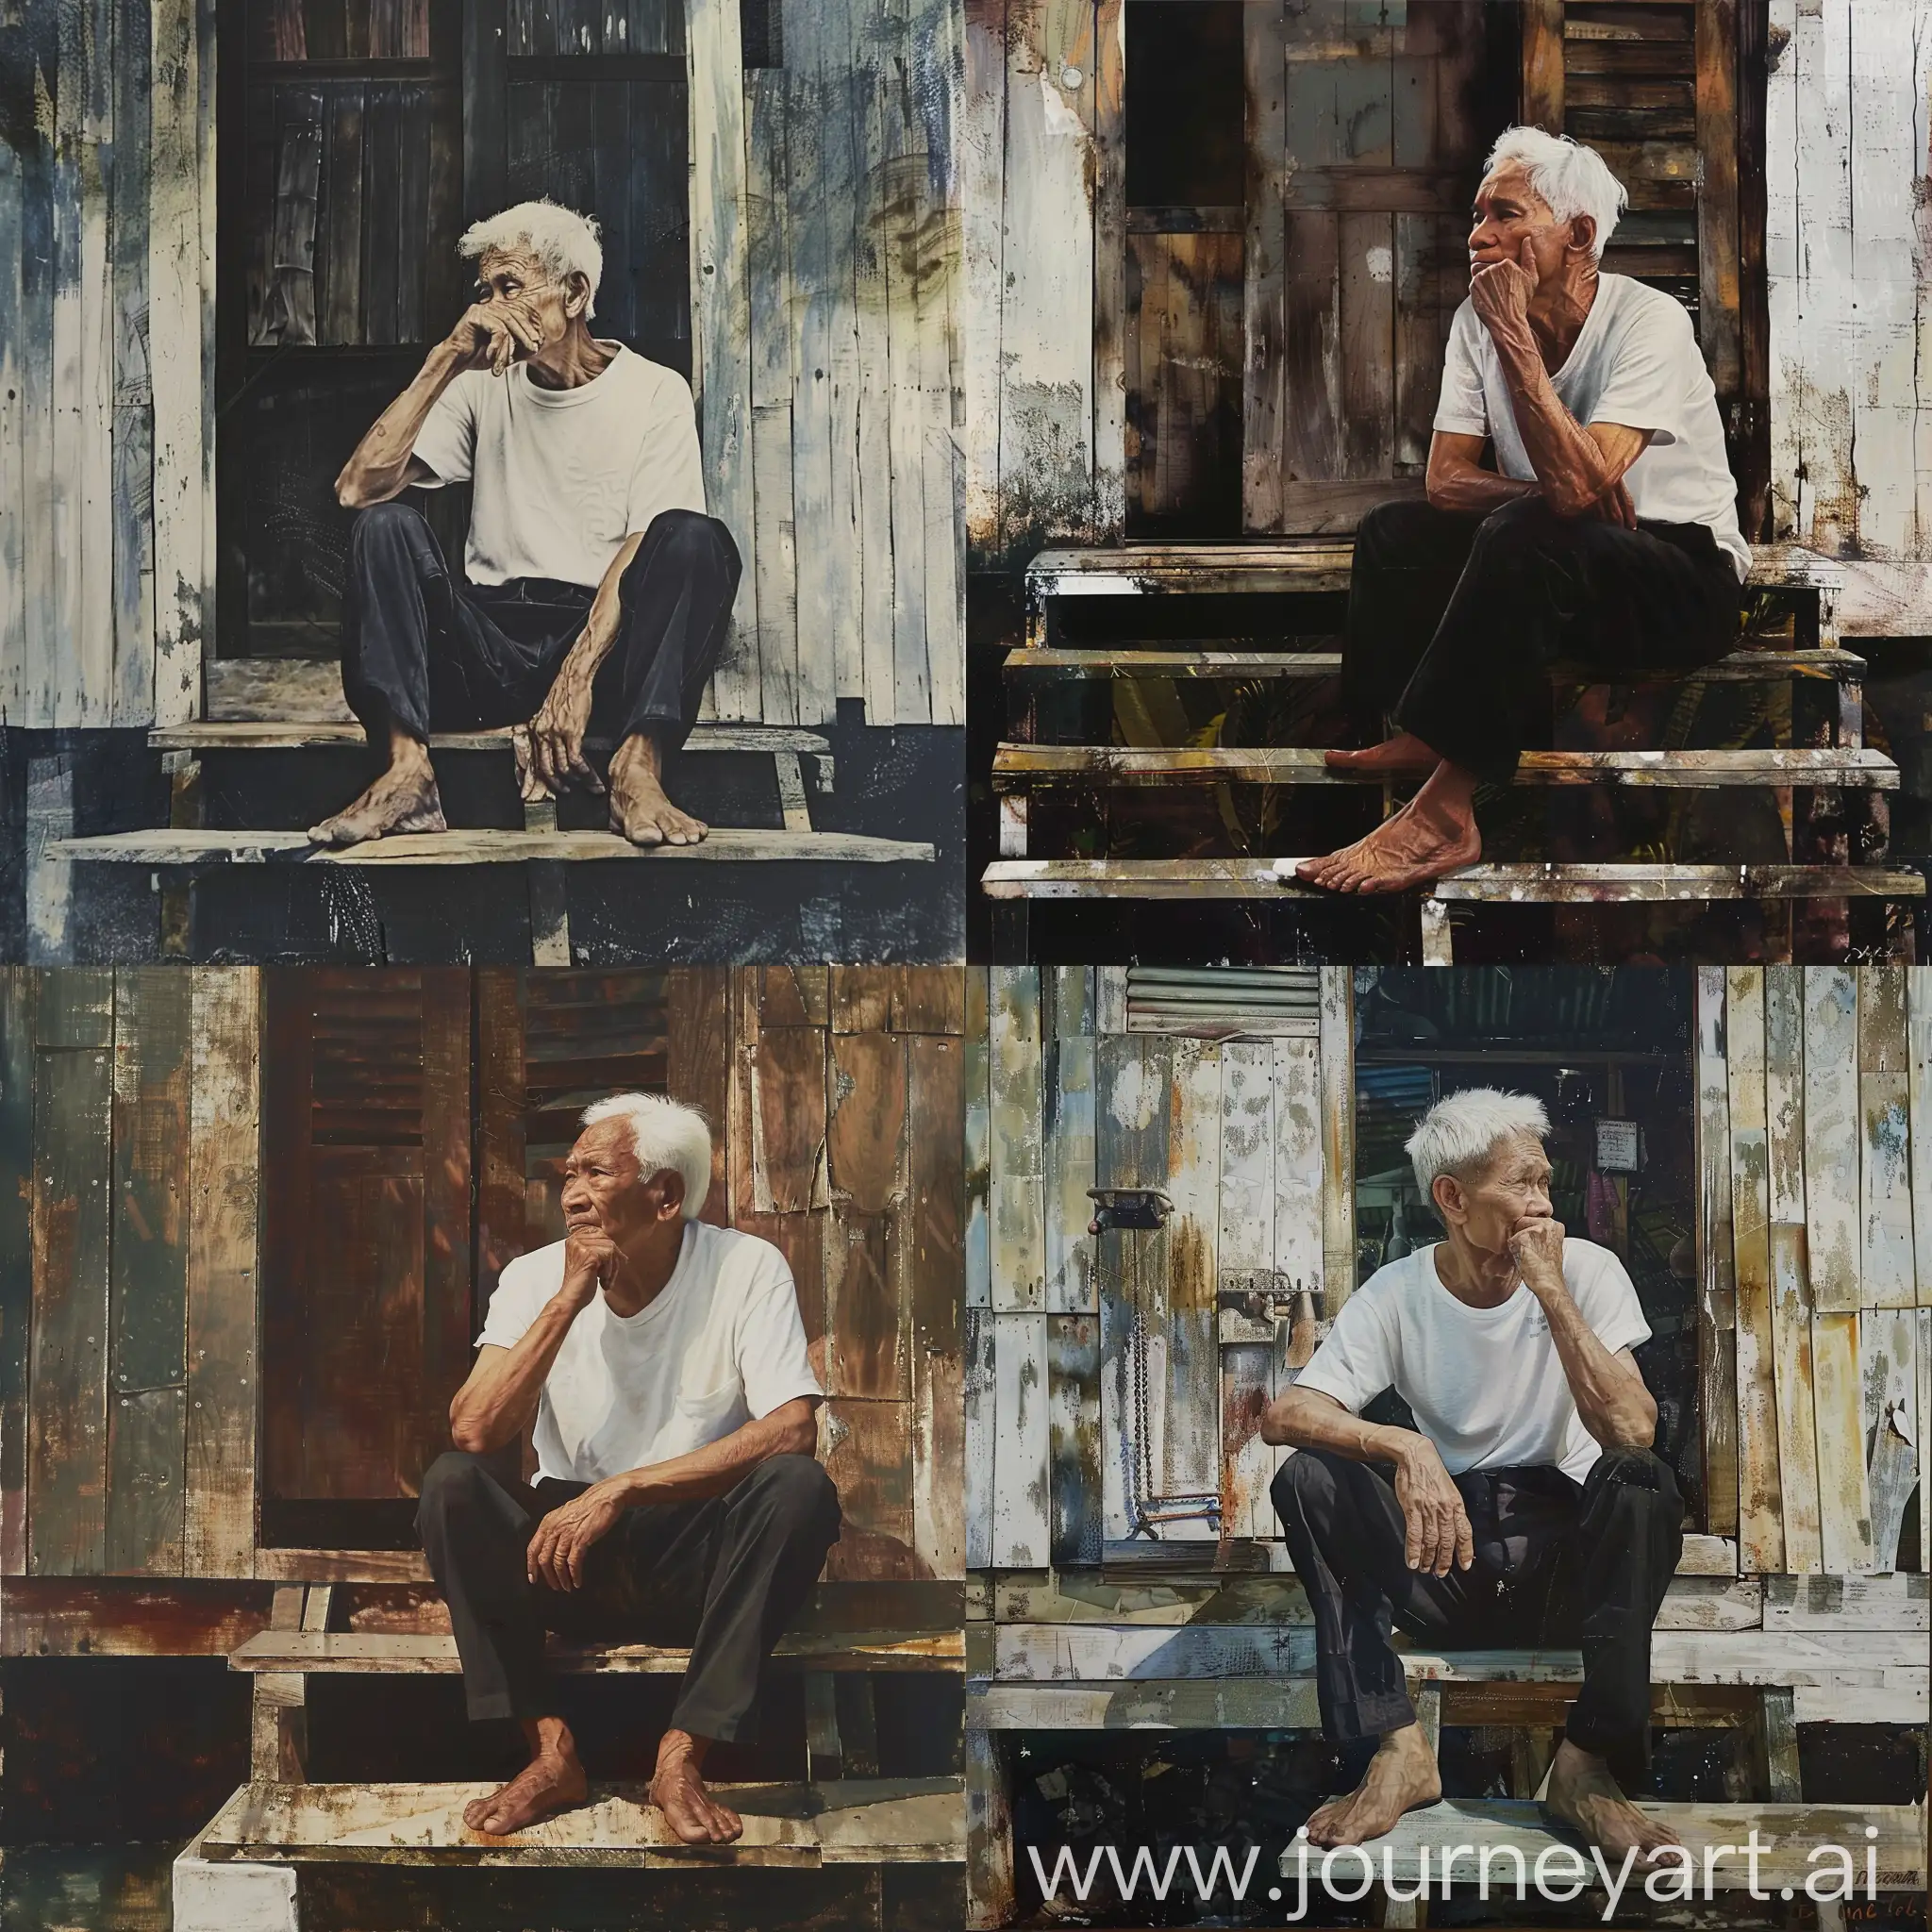 an Old Malay man sitting on the steps of a wooden house. White hair. wearing a white t-shirt and black slacks. one hand lifting the chin. collage technique